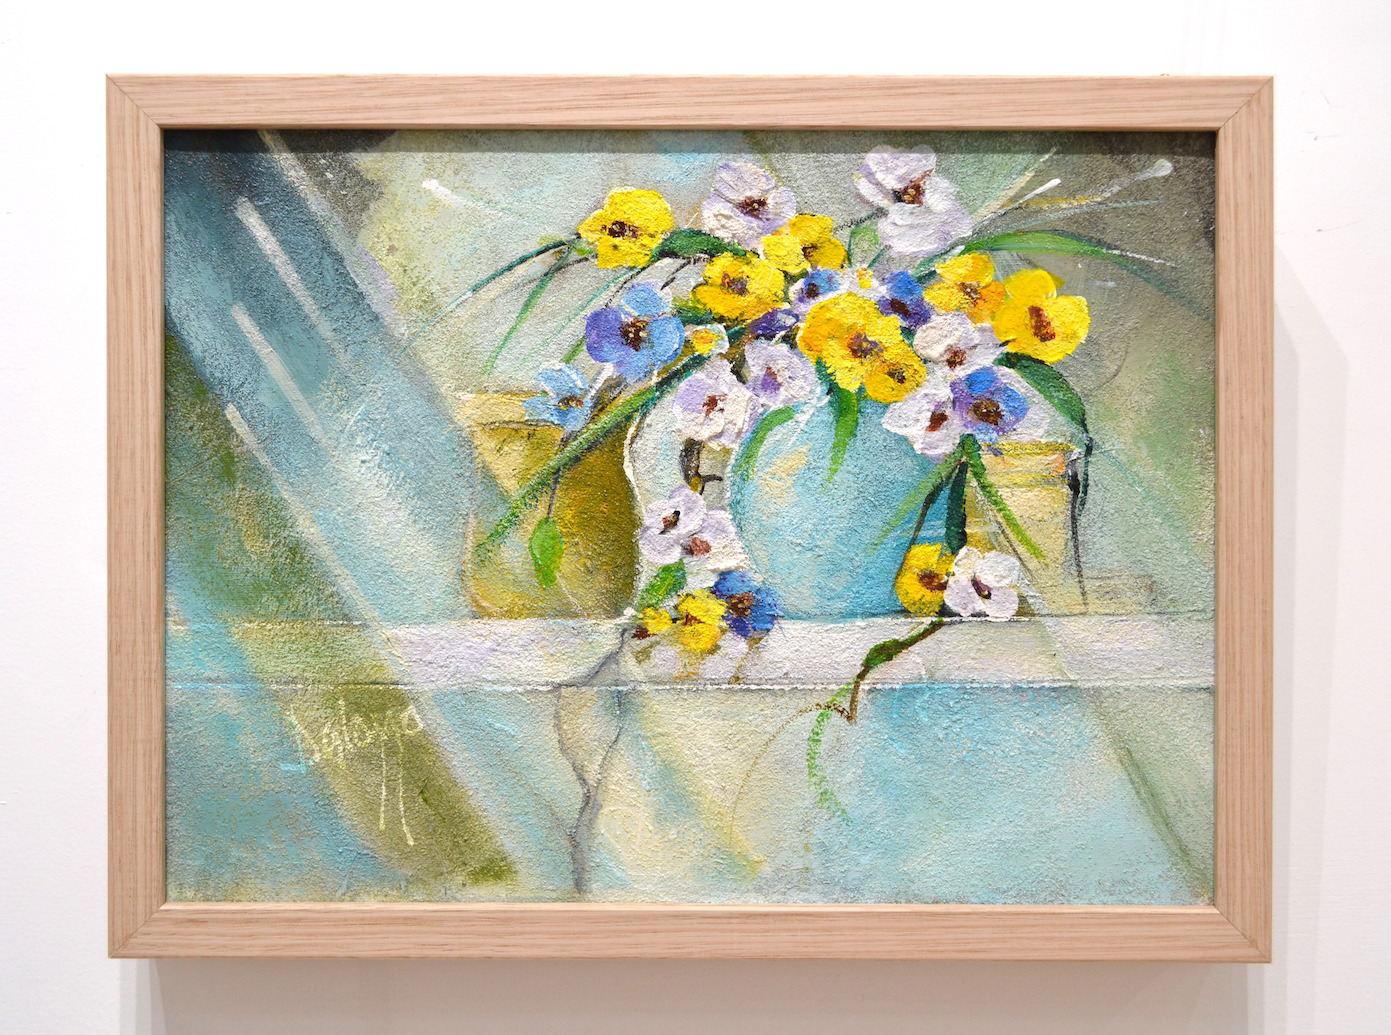 Framed Front View Of Still Life Painting "Afternoon Sunlight" By Lucette Dalozzo